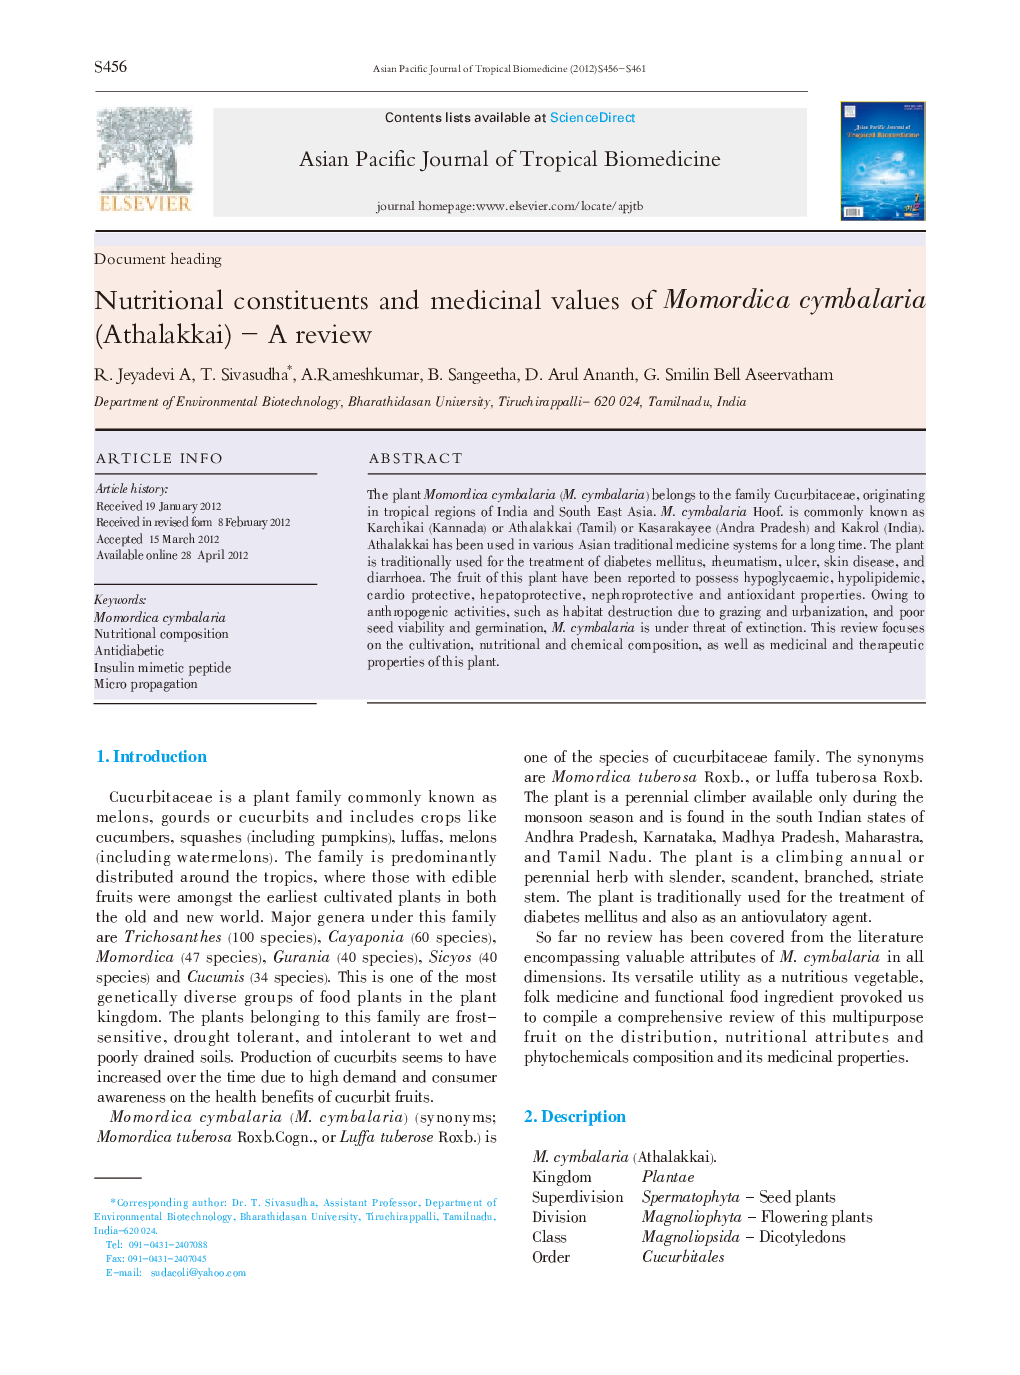 Nutritional constituents and medicinal values of Momordica cymbalaria (Athalakkai) - A review